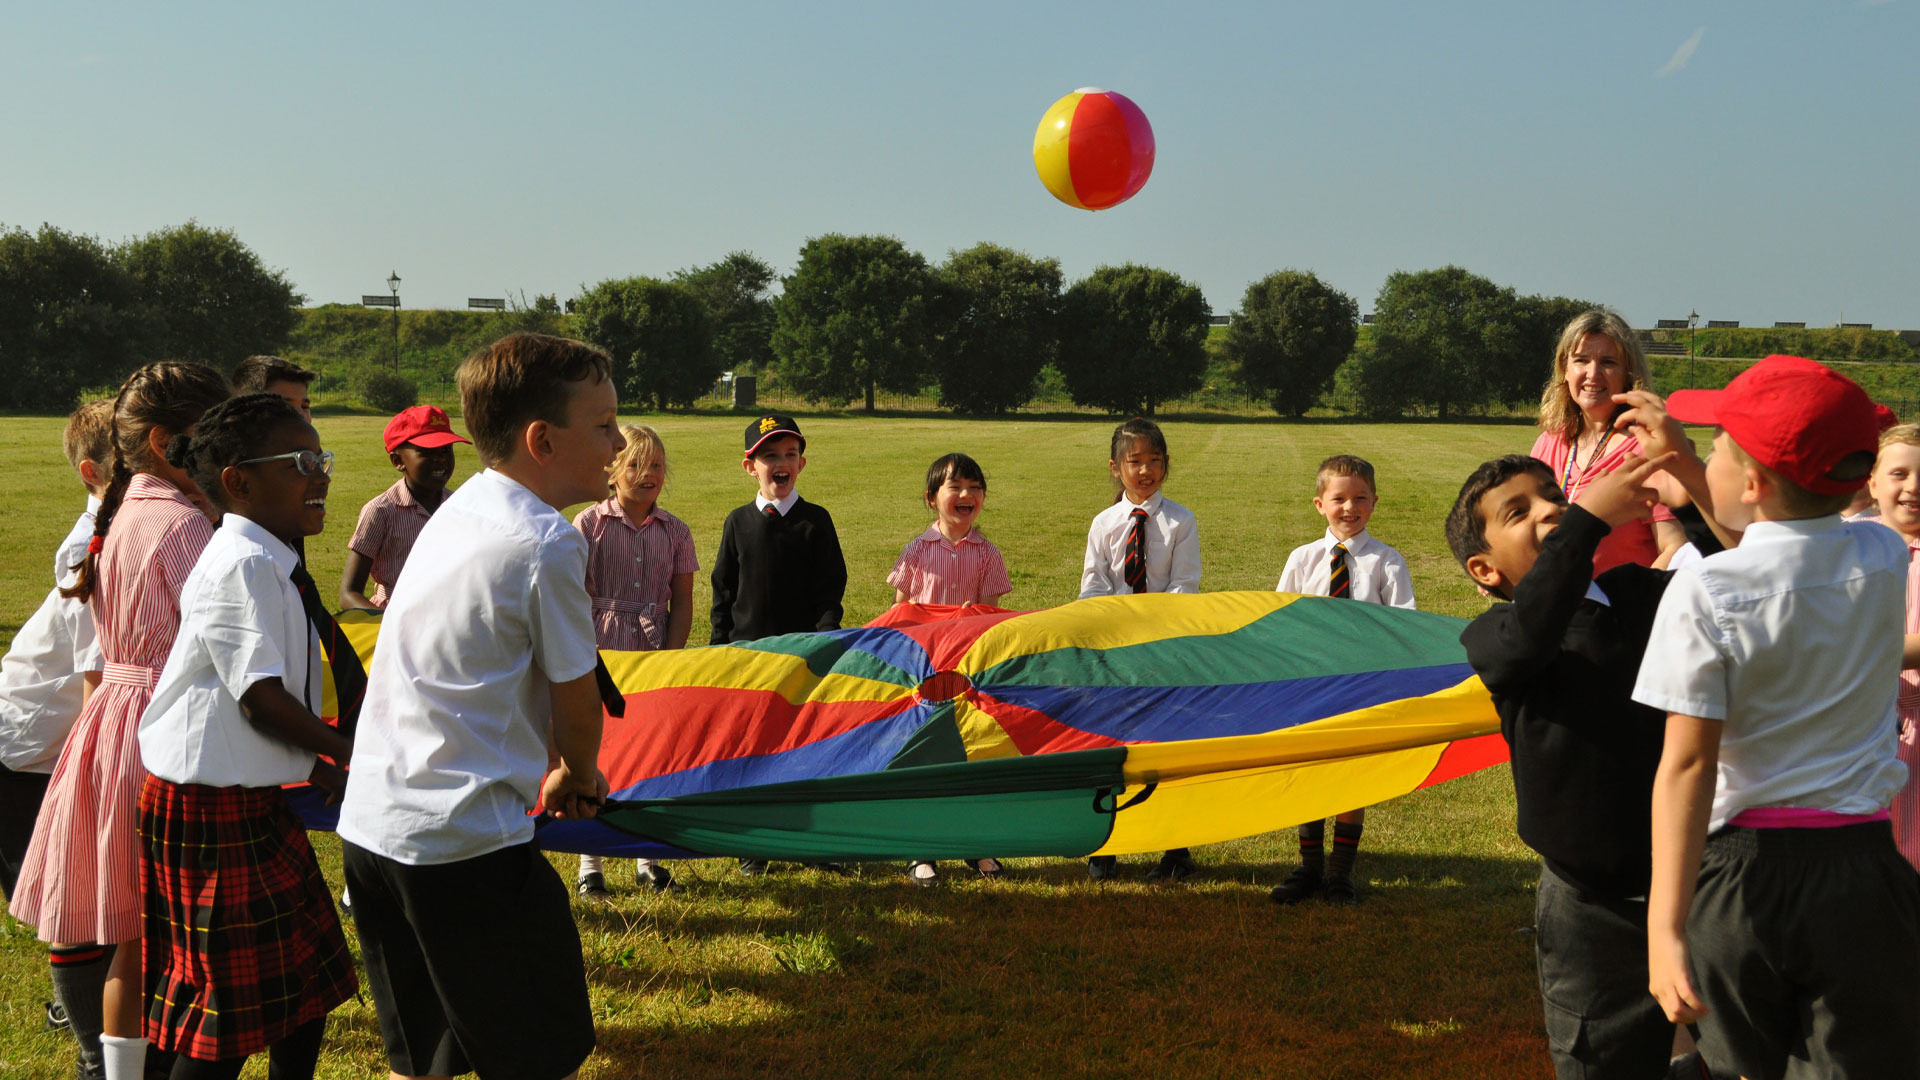 Junior PGS students playing outdoors with a parachute